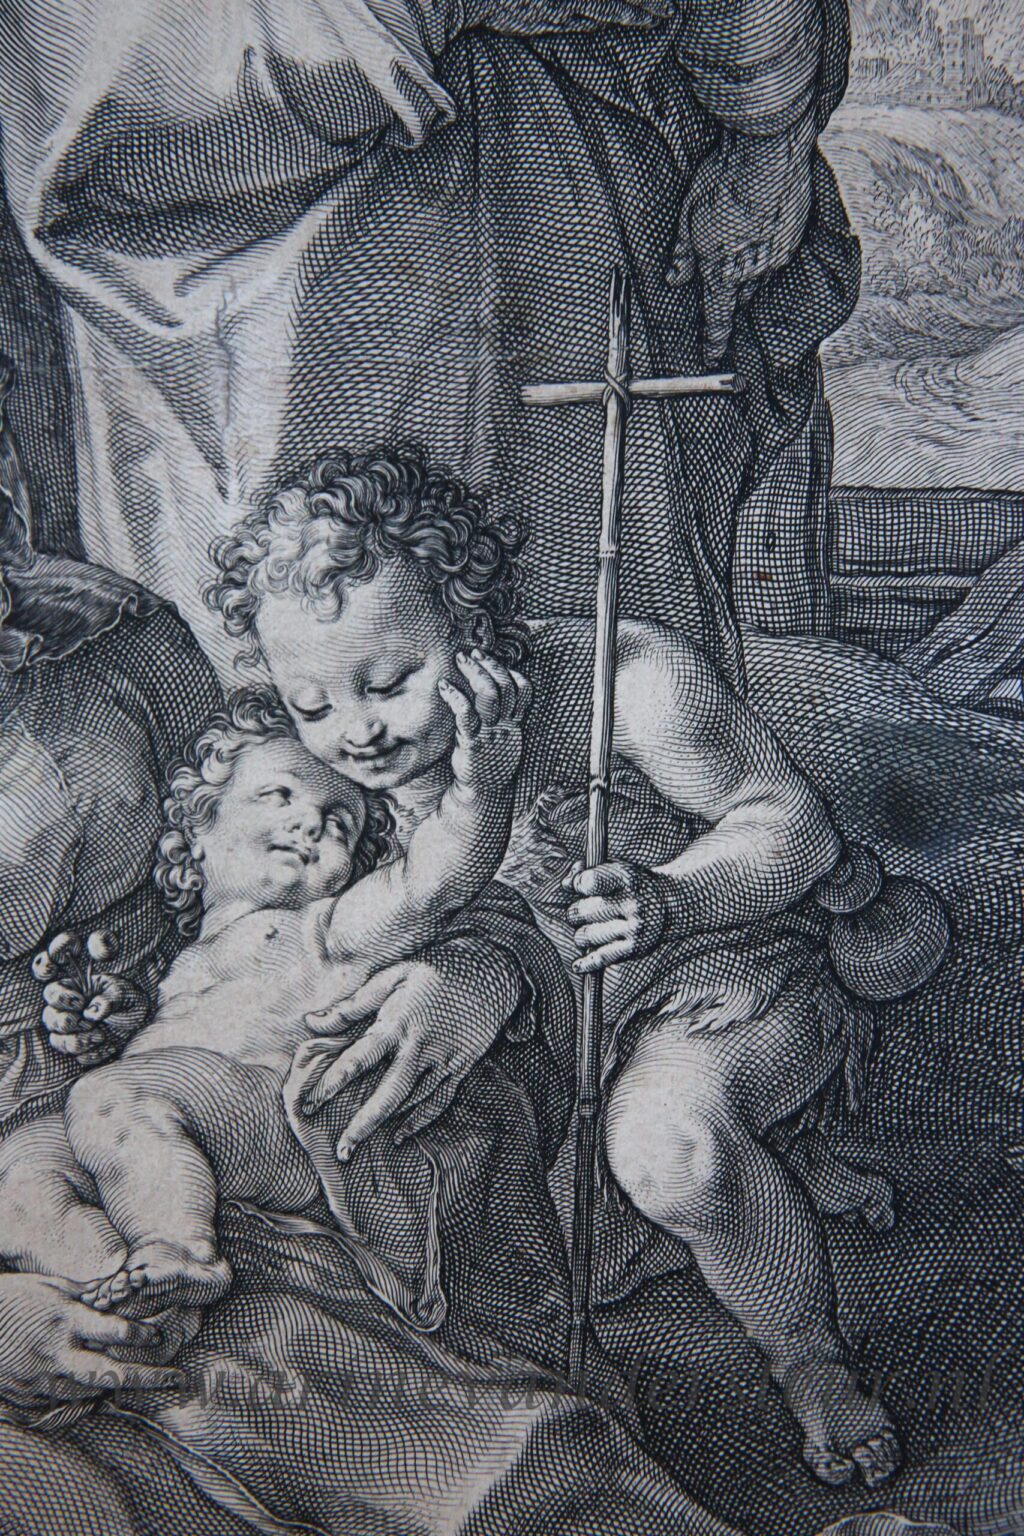 [Antique print, engraving] Holy Family with St. John (Life of the Virgin; set), published 1593, 1 p.